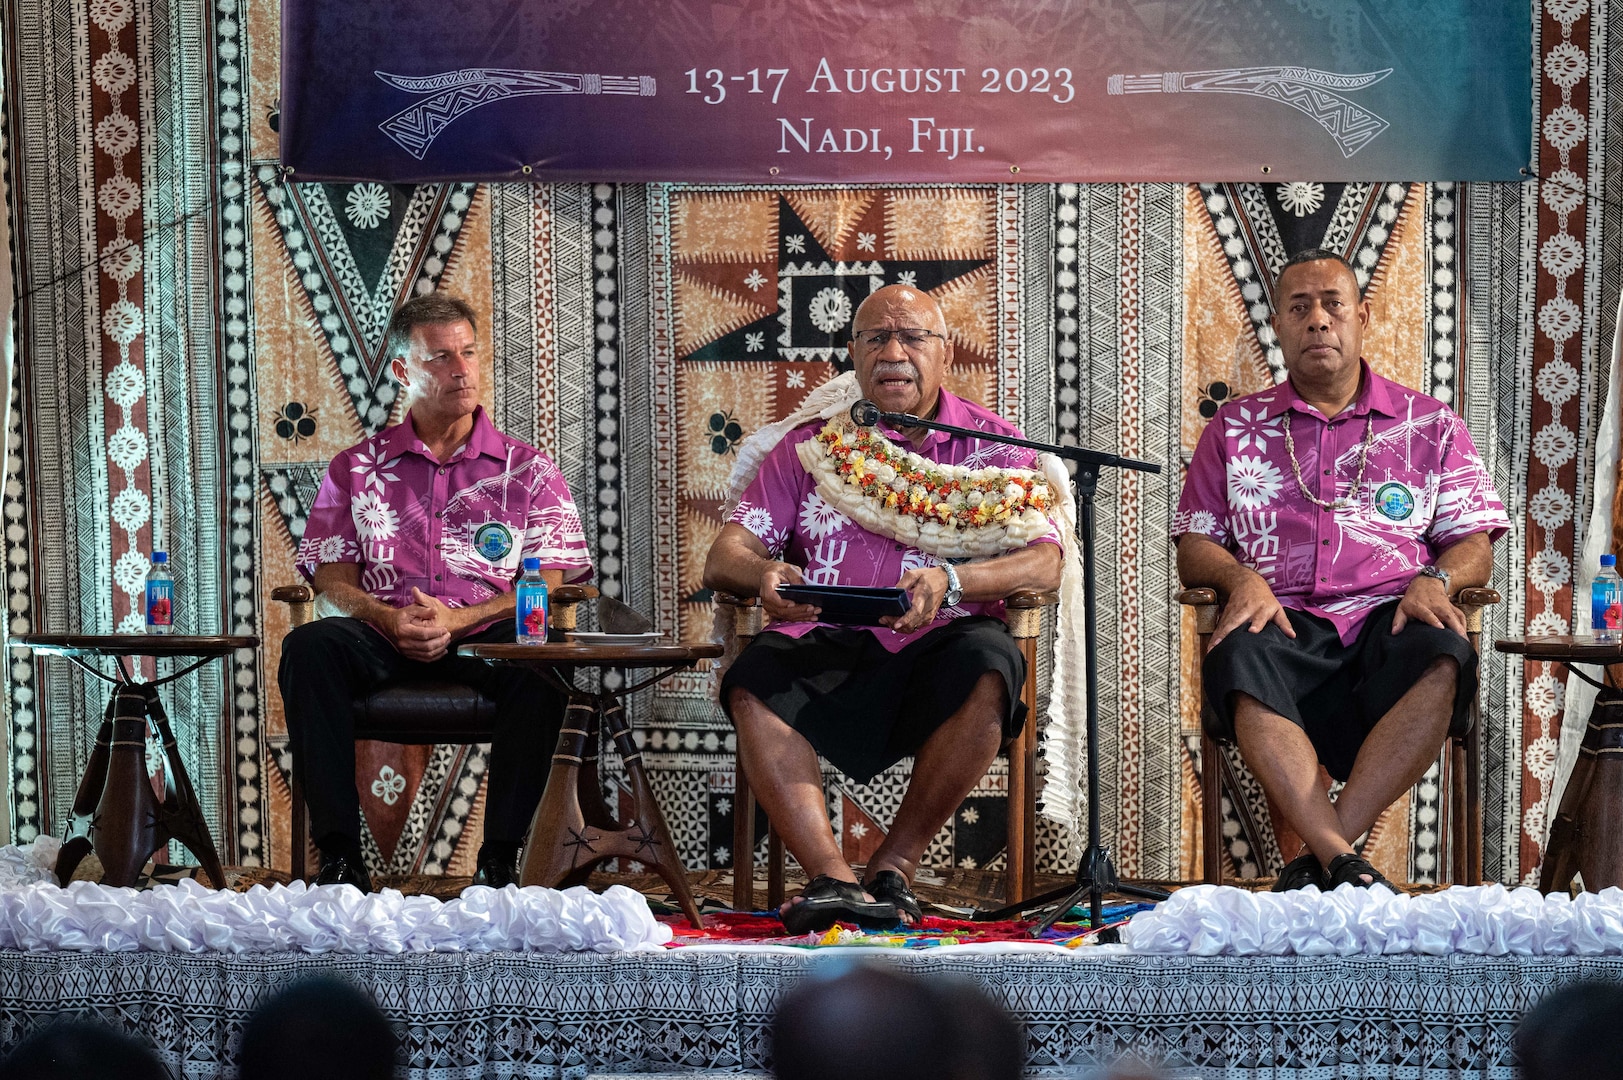 Commander U.S. Indo-Pacific Command Adm. John C. Aquilino, Fiji Prime Minister Sitiveni Rabuka, and Commander of the Republic of Fiji Military Forces Maj. Gen. Jone Kalouniwai attend the opening ceremony for the 25th annual Indo-Pacific Chiefs of Defense (CHODs) conference, in Nadi, Fiji, on Aug. 14. The conference was co-hosted by the Republic of Fiji Military Forces and USINDOPACOM, and it brought together senior military leaders from 27 countries to discuss challenges and opportunities in the region. USINDOPACOM is committed to enhancing stability in the Indo-Pacific region by promoting security cooperation, encouraging peaceful development, responding to contingencies, deterring aggression and, when necessary, fighting to win. (U.S. Navy photo by Chief Mass Communication Specialist Shannon M. Smith)